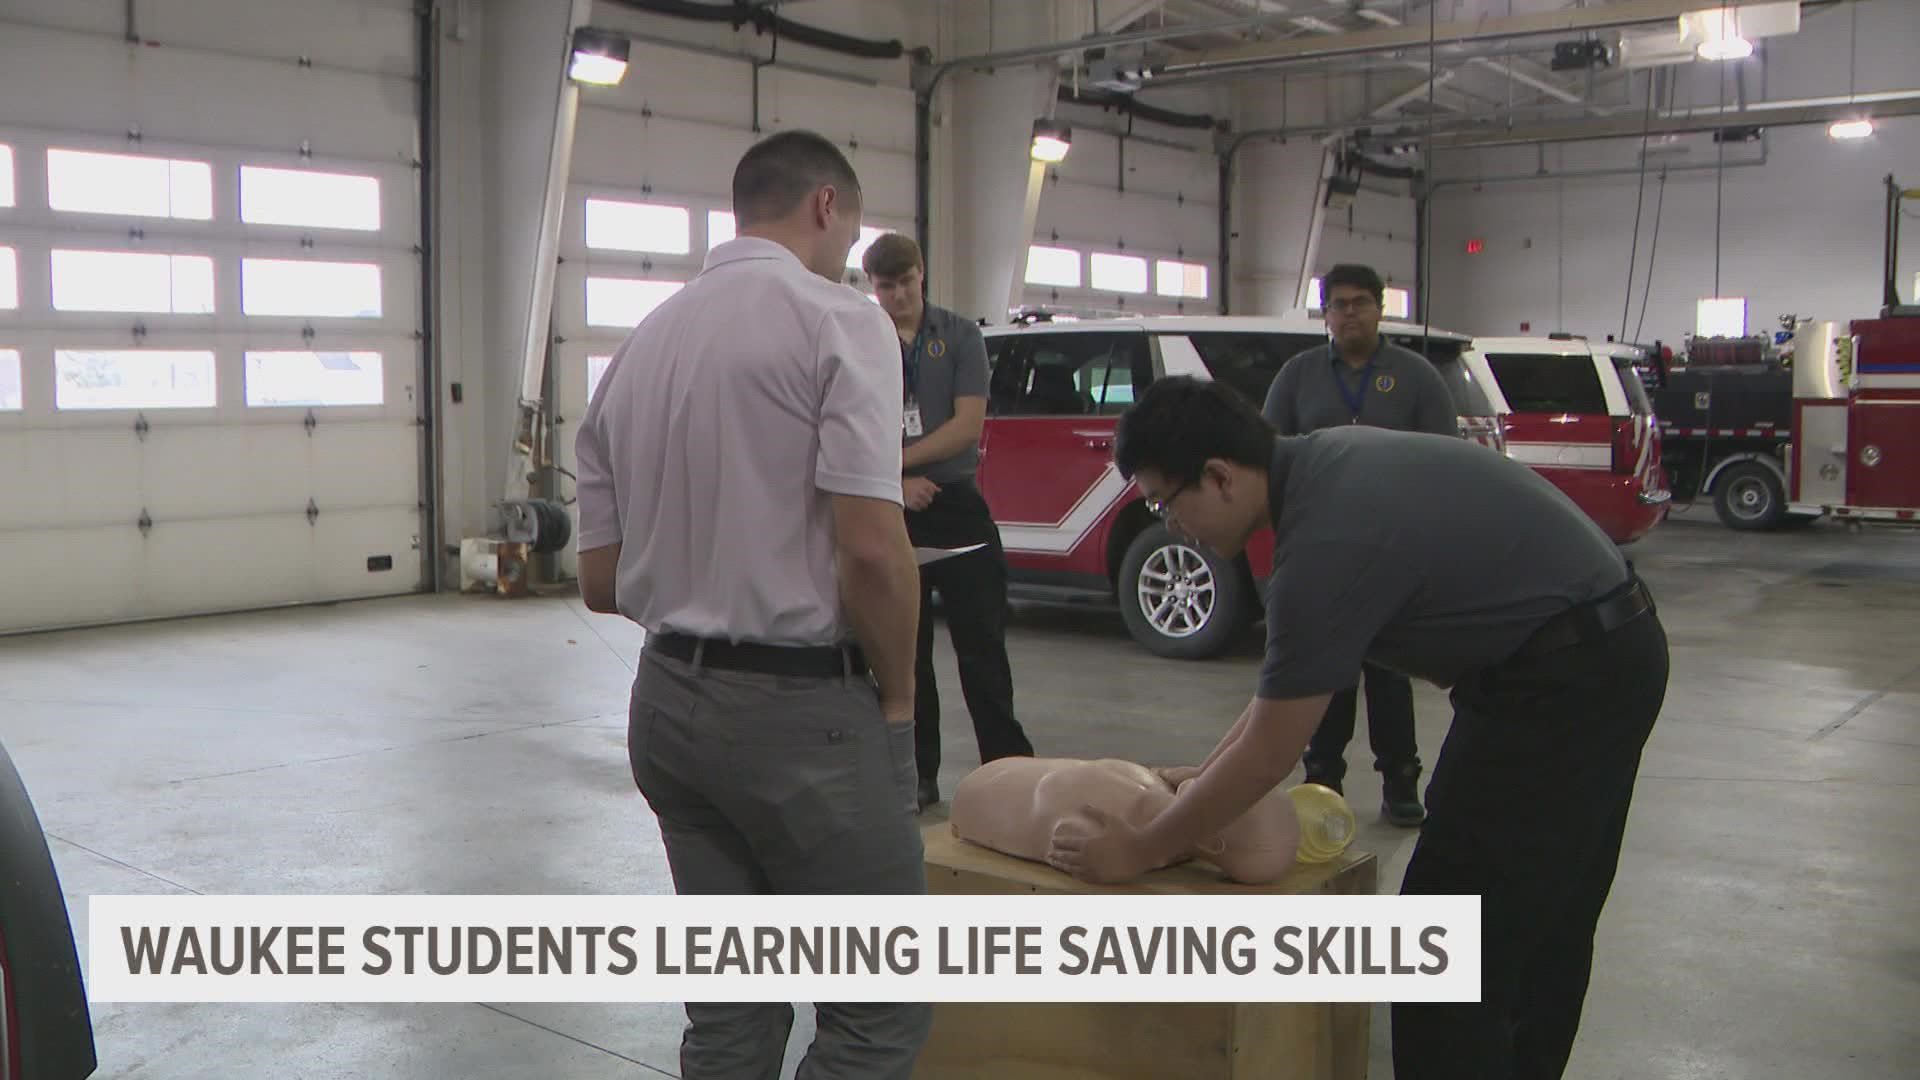 Every Wednesday is an early out day for Waukee Schools. A total of 16 Waukee students spend their early dismissal learning to save lives.